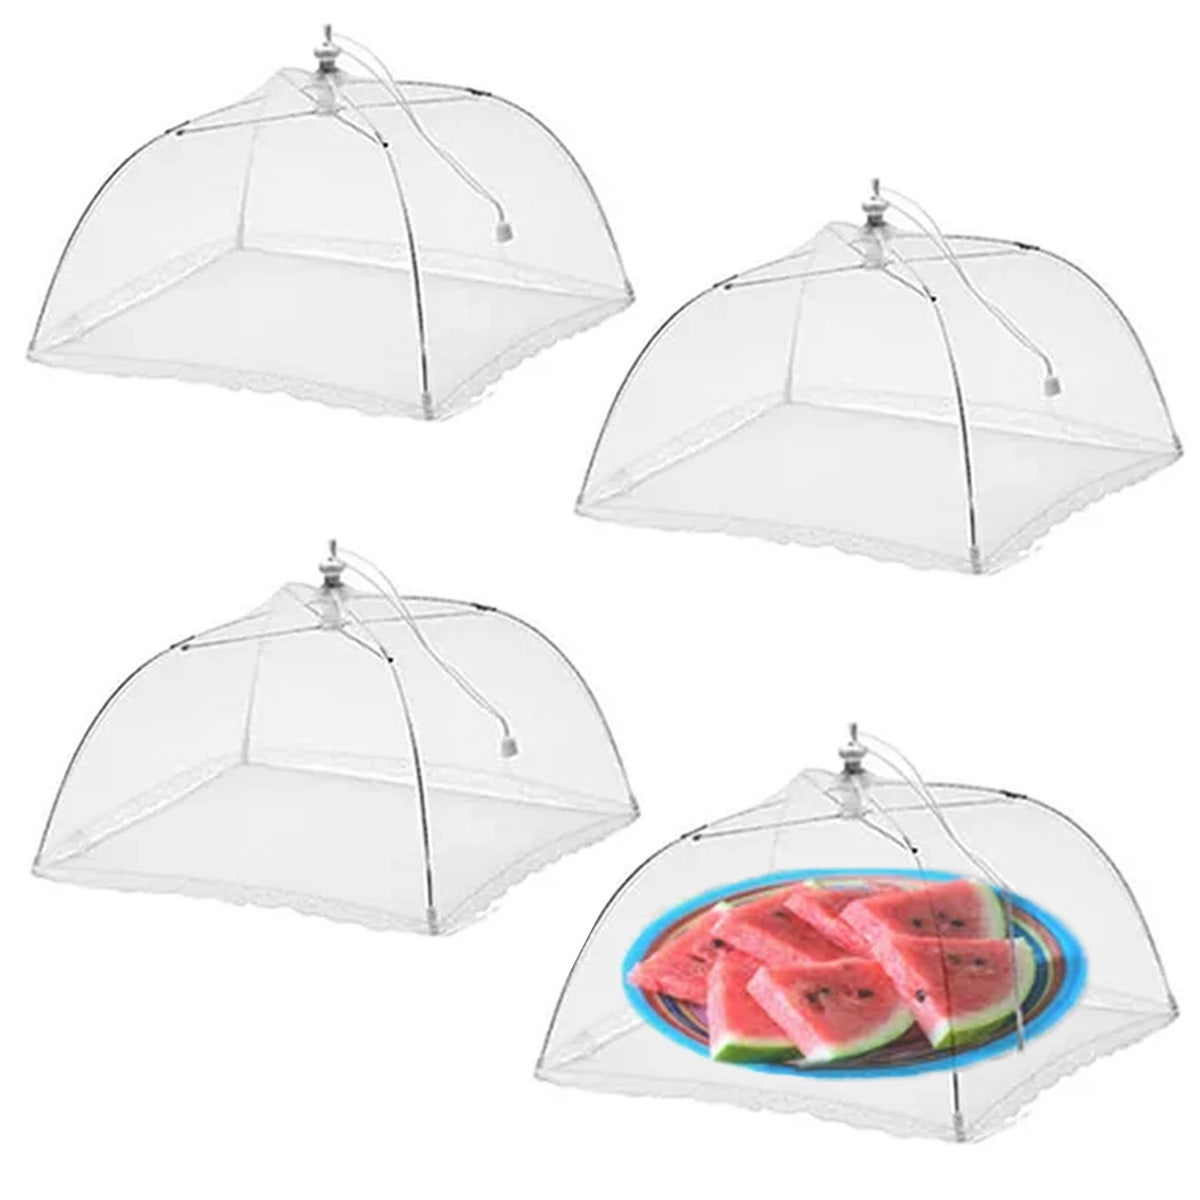 6pk Pop-Up 47x26 Jumbo Outdoor Food Tent Covers - Keep Bugs Out